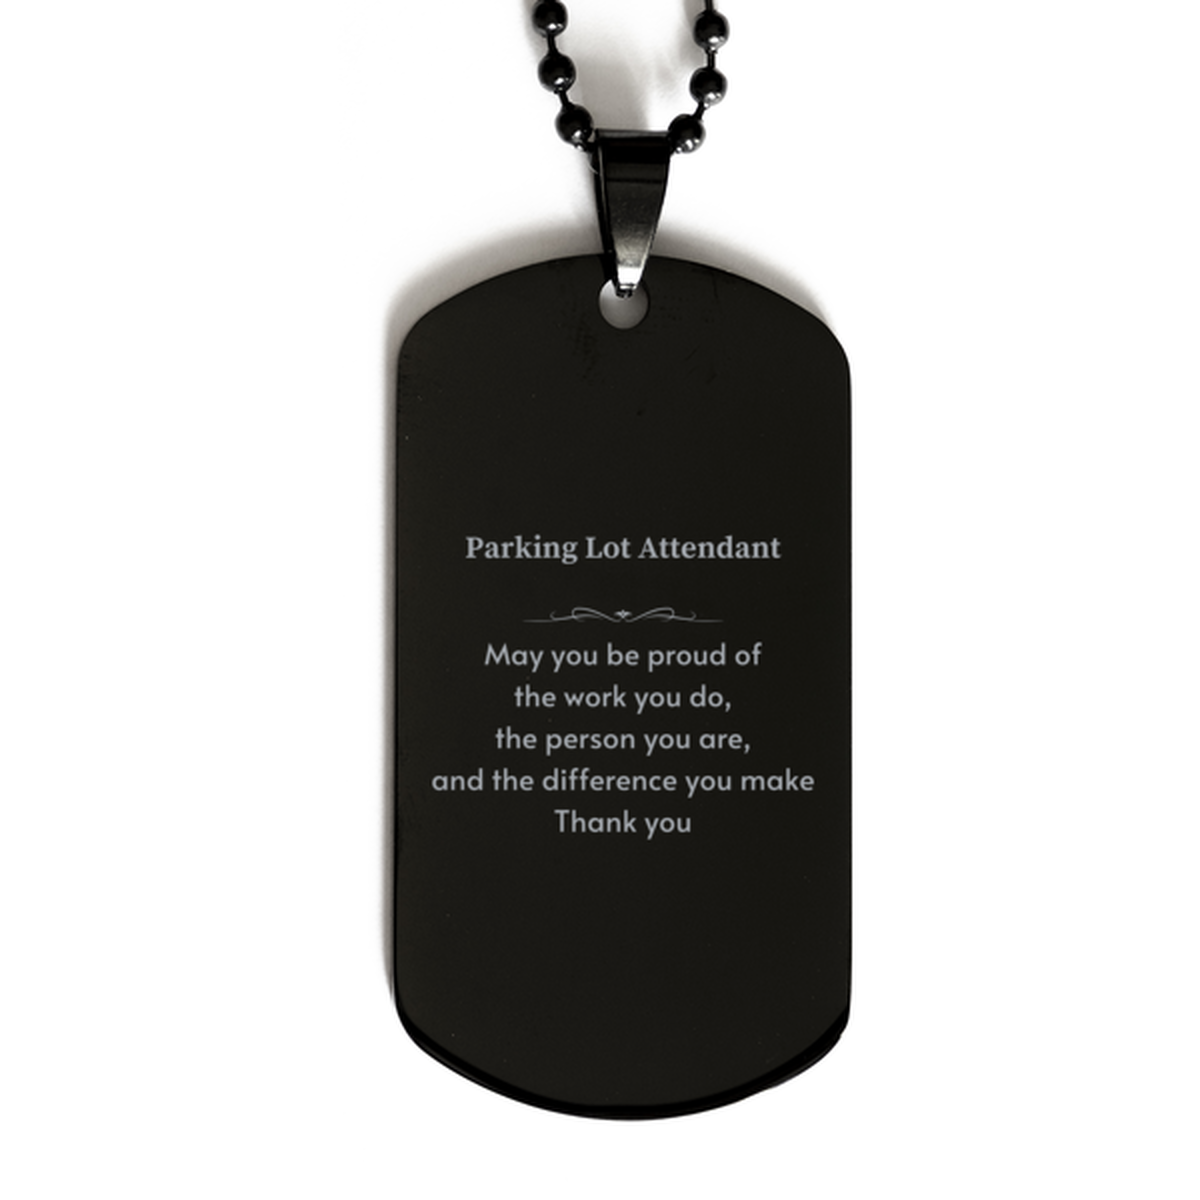 Heartwarming Black Dog Tag Retirement Coworkers Gifts for Parking Lot Attendant, Parking Lot Attendant May You be proud of the work you do, the person you are Gifts for Boss Men Women Friends